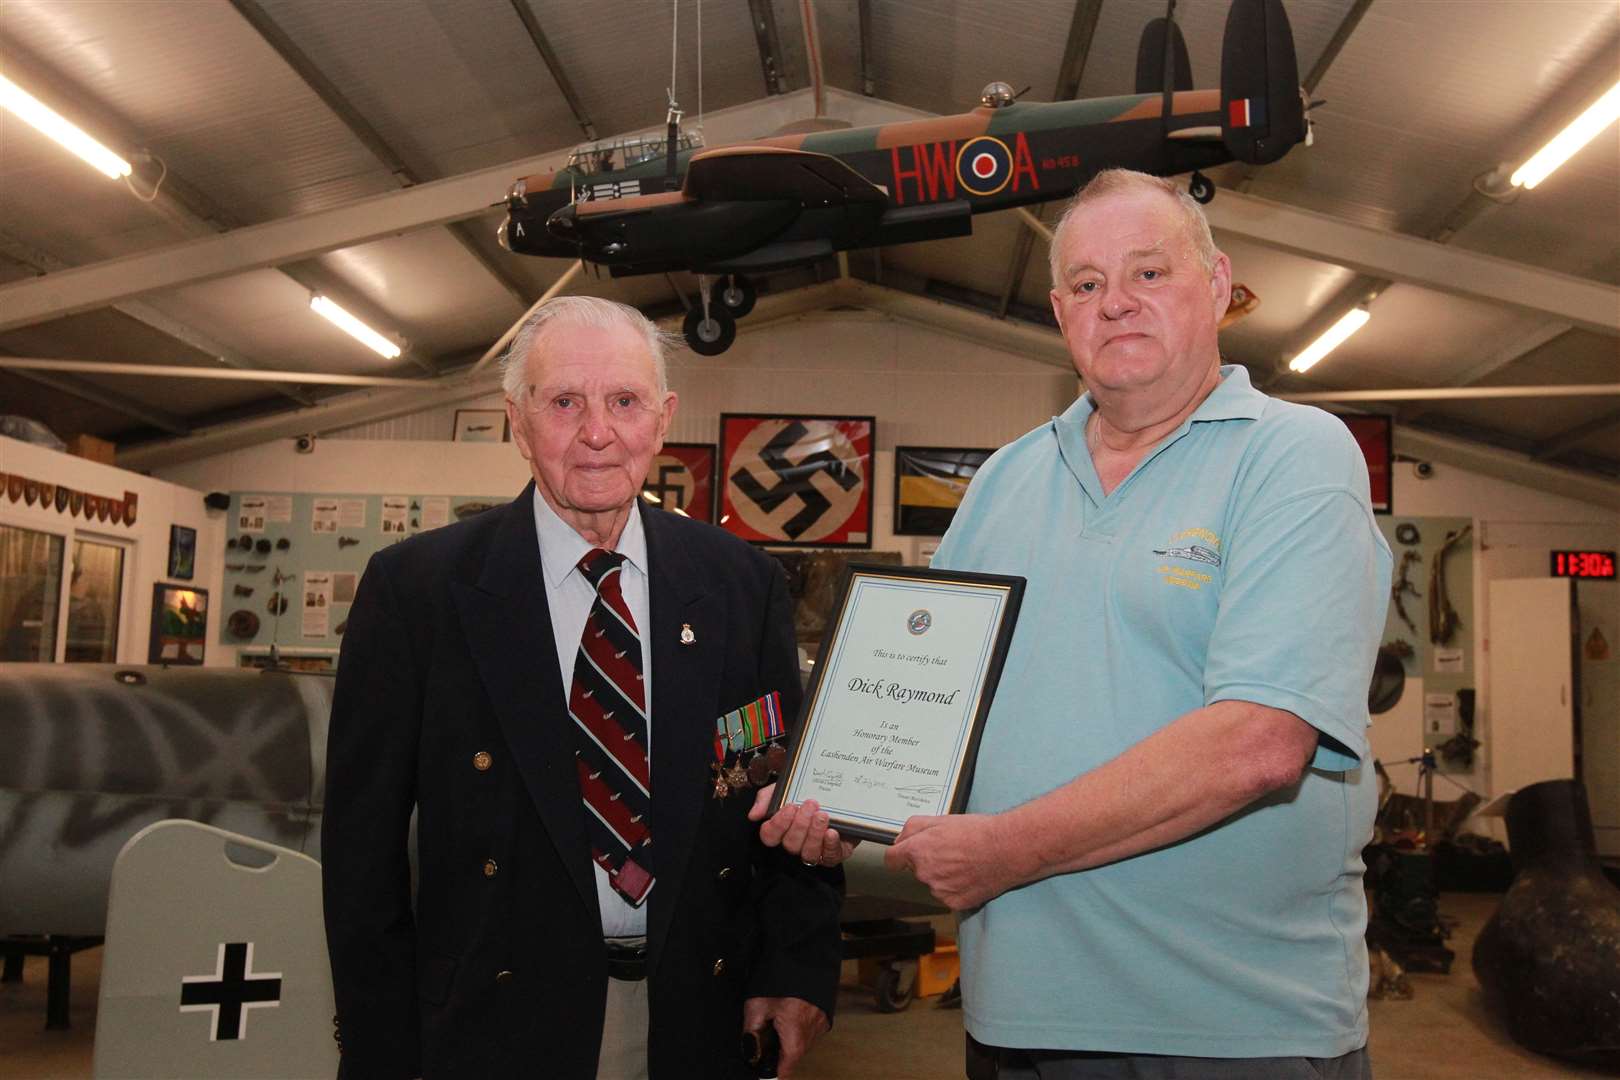 Dick Raymond received an honorary member certificate from Trevor Matthews, trustee at the Lashenden Air Warfare Museum.